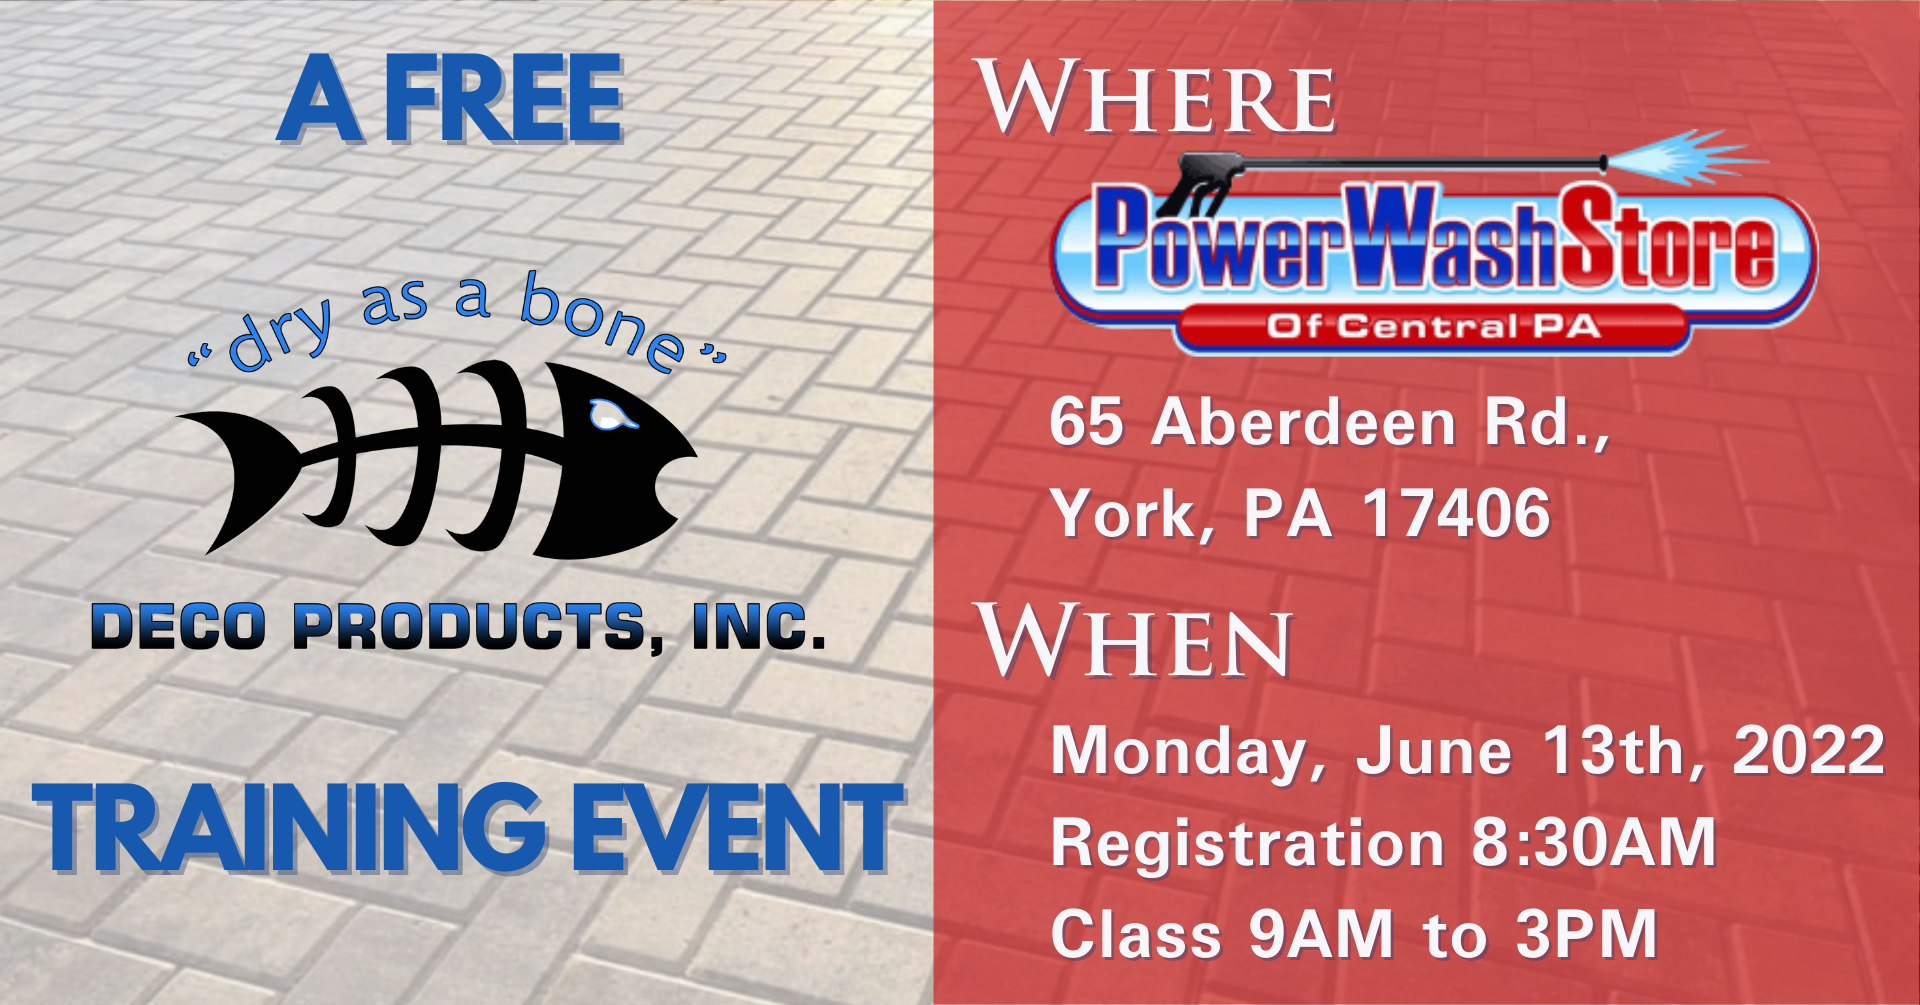 a flyer promoting a free training event for a power wash store